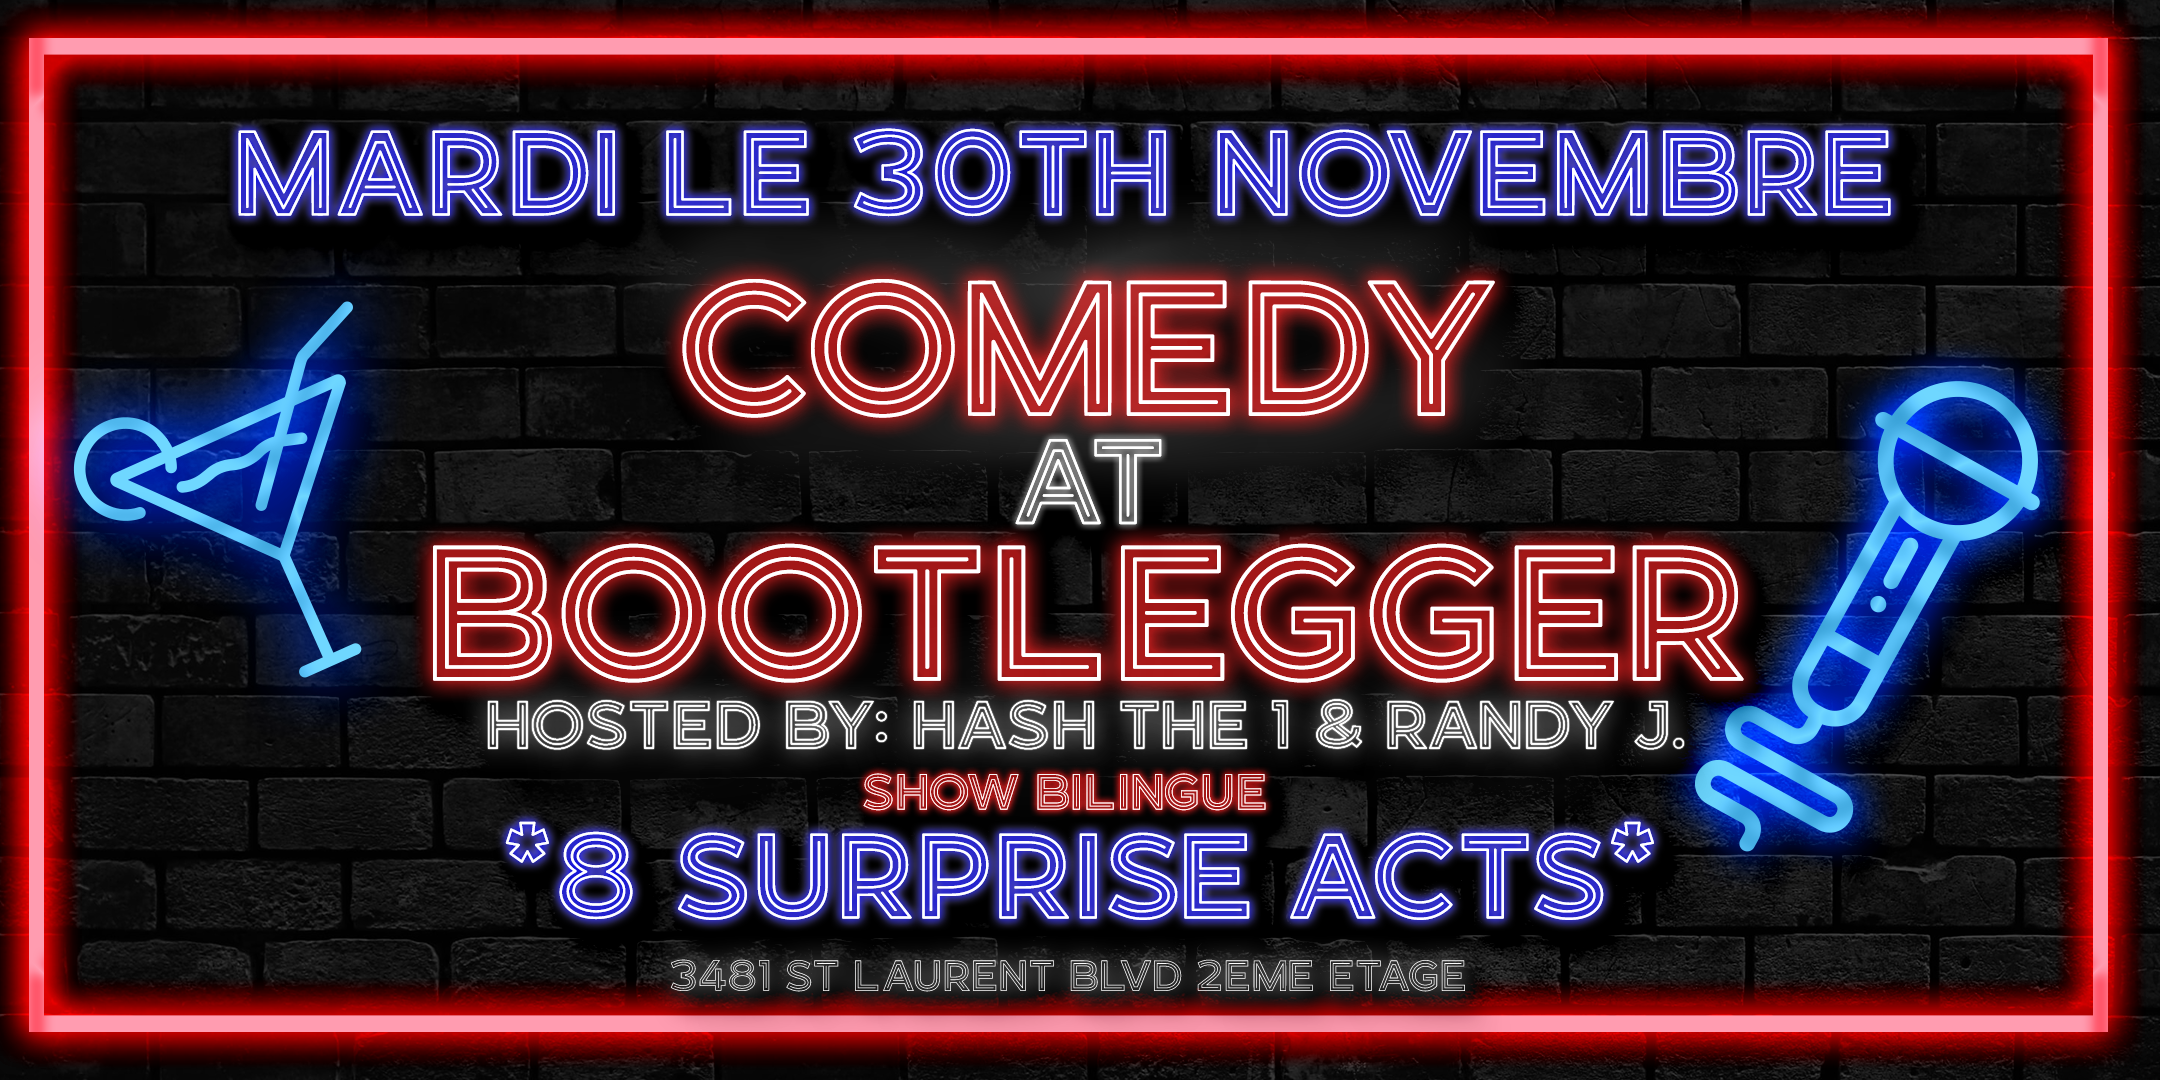 Comedy at Bootlegger hosted by Hash the 1 & Randy J